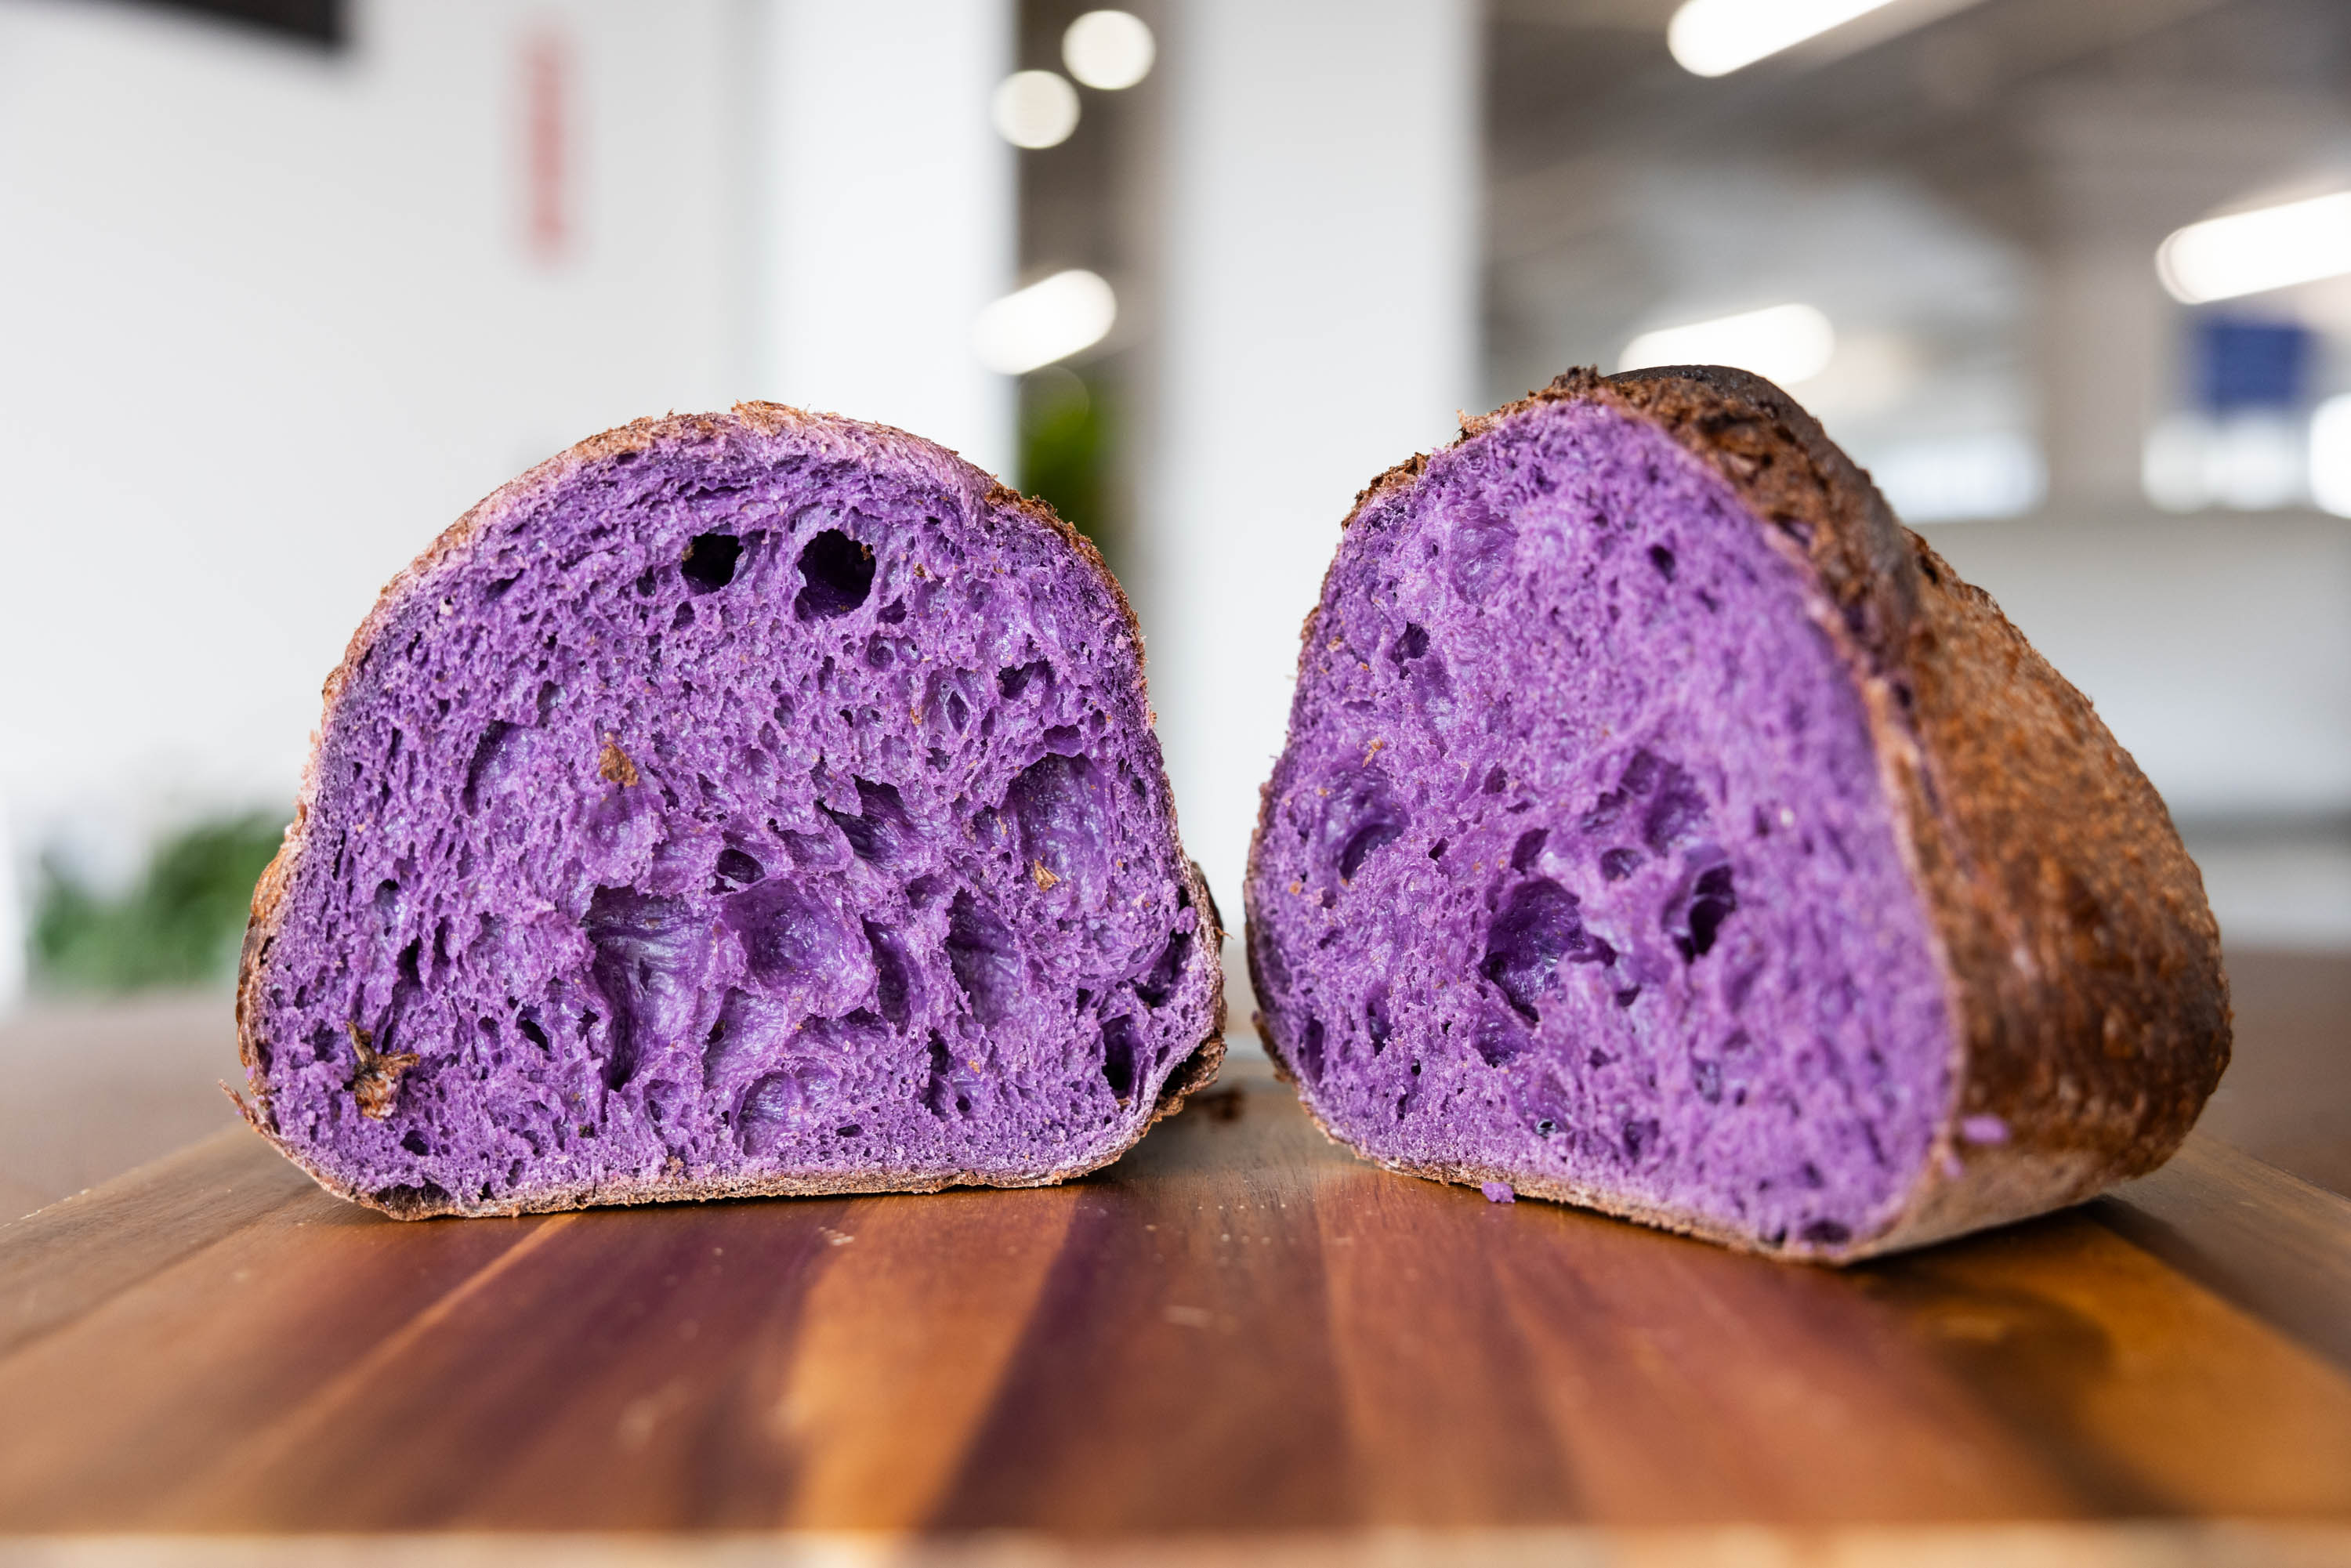 San Francisco $18 Bread: We Tried the Purple ‘Playful Sourdough’ Everyone’s Talking About